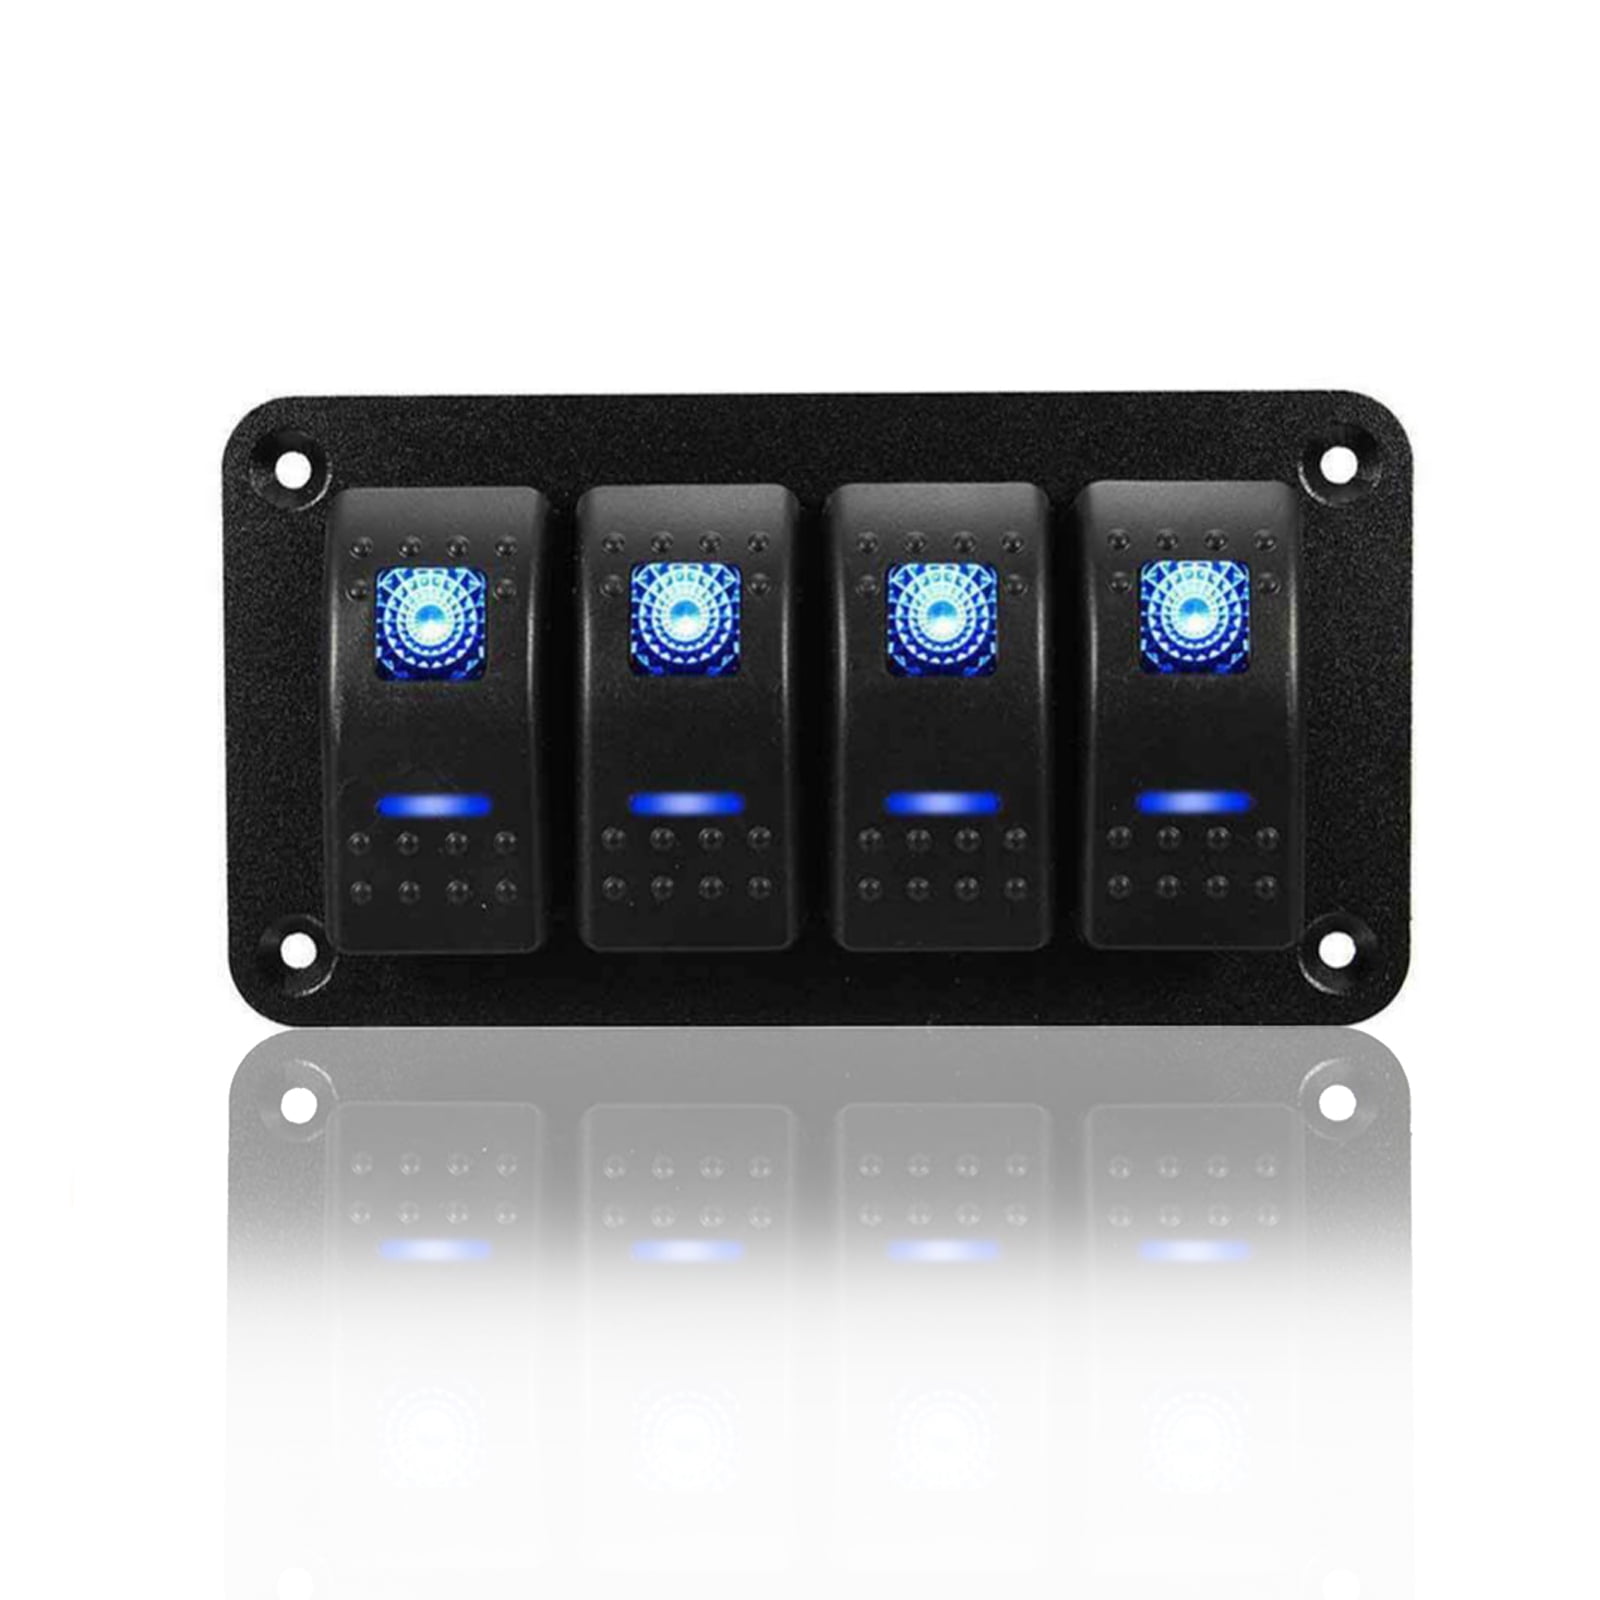 4 Gang Toggle Rocker Switch Panel with USB for Car Boat Marine RV Truck Blue LED 